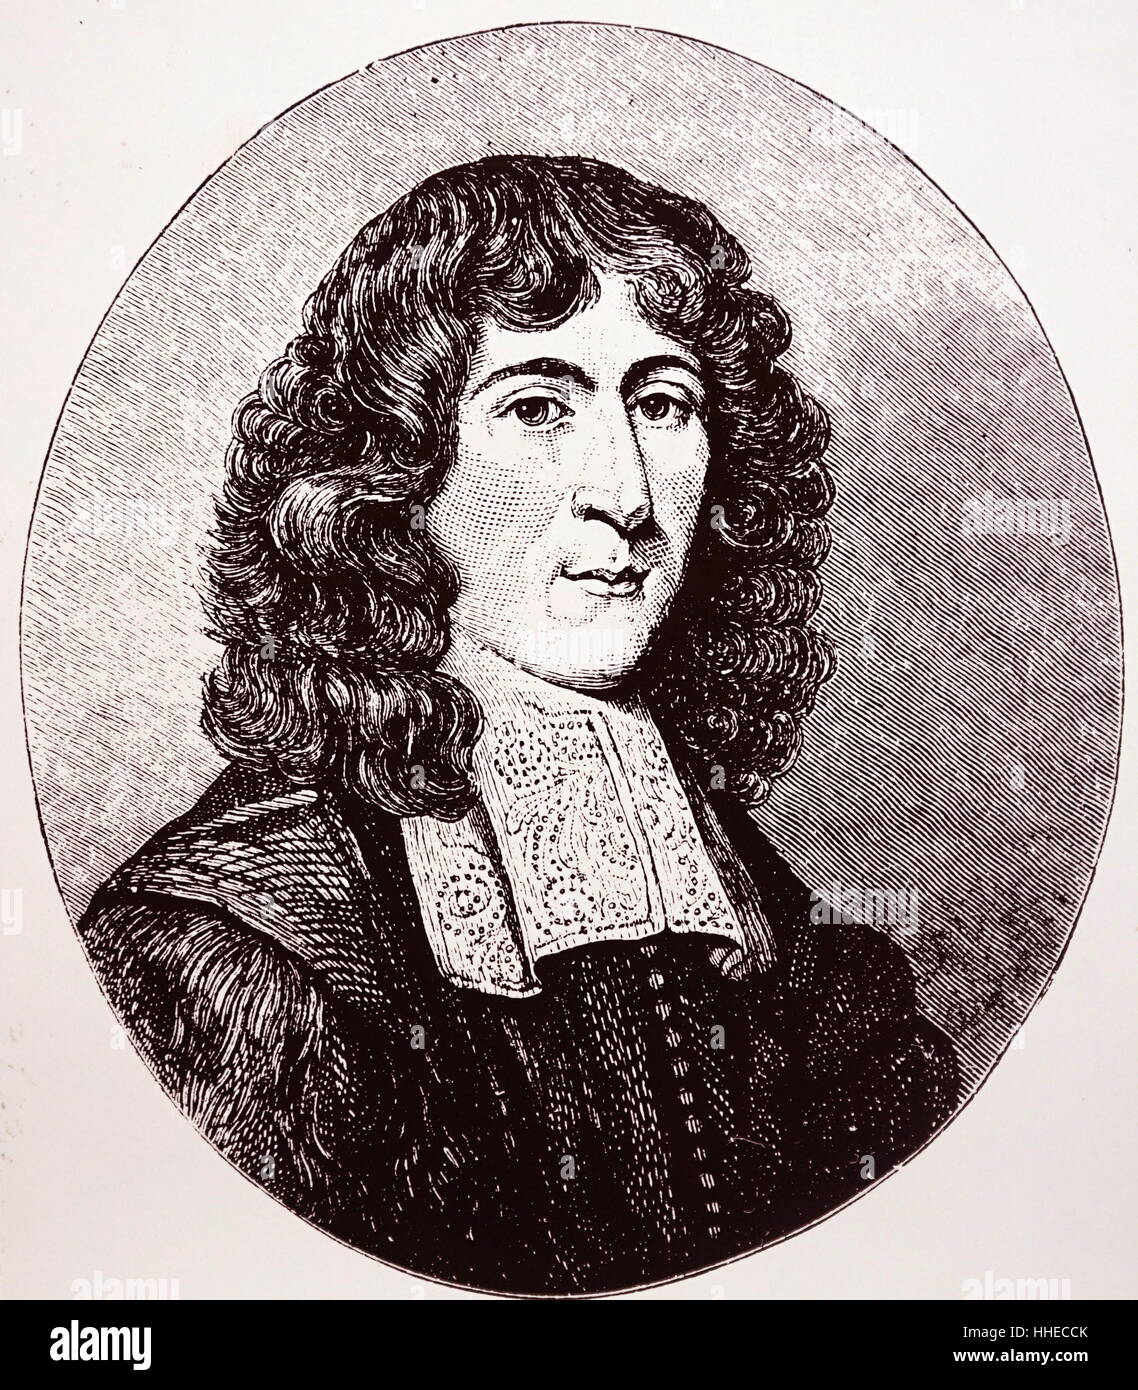 John Mayow FRS (1641–1679) was a chemist, physician, and physiologist who is remembered today for conducting early research into respiration and the nature of air. Mayow worked in a field that is sometimes called pneumatic chemistry. Stock Photo